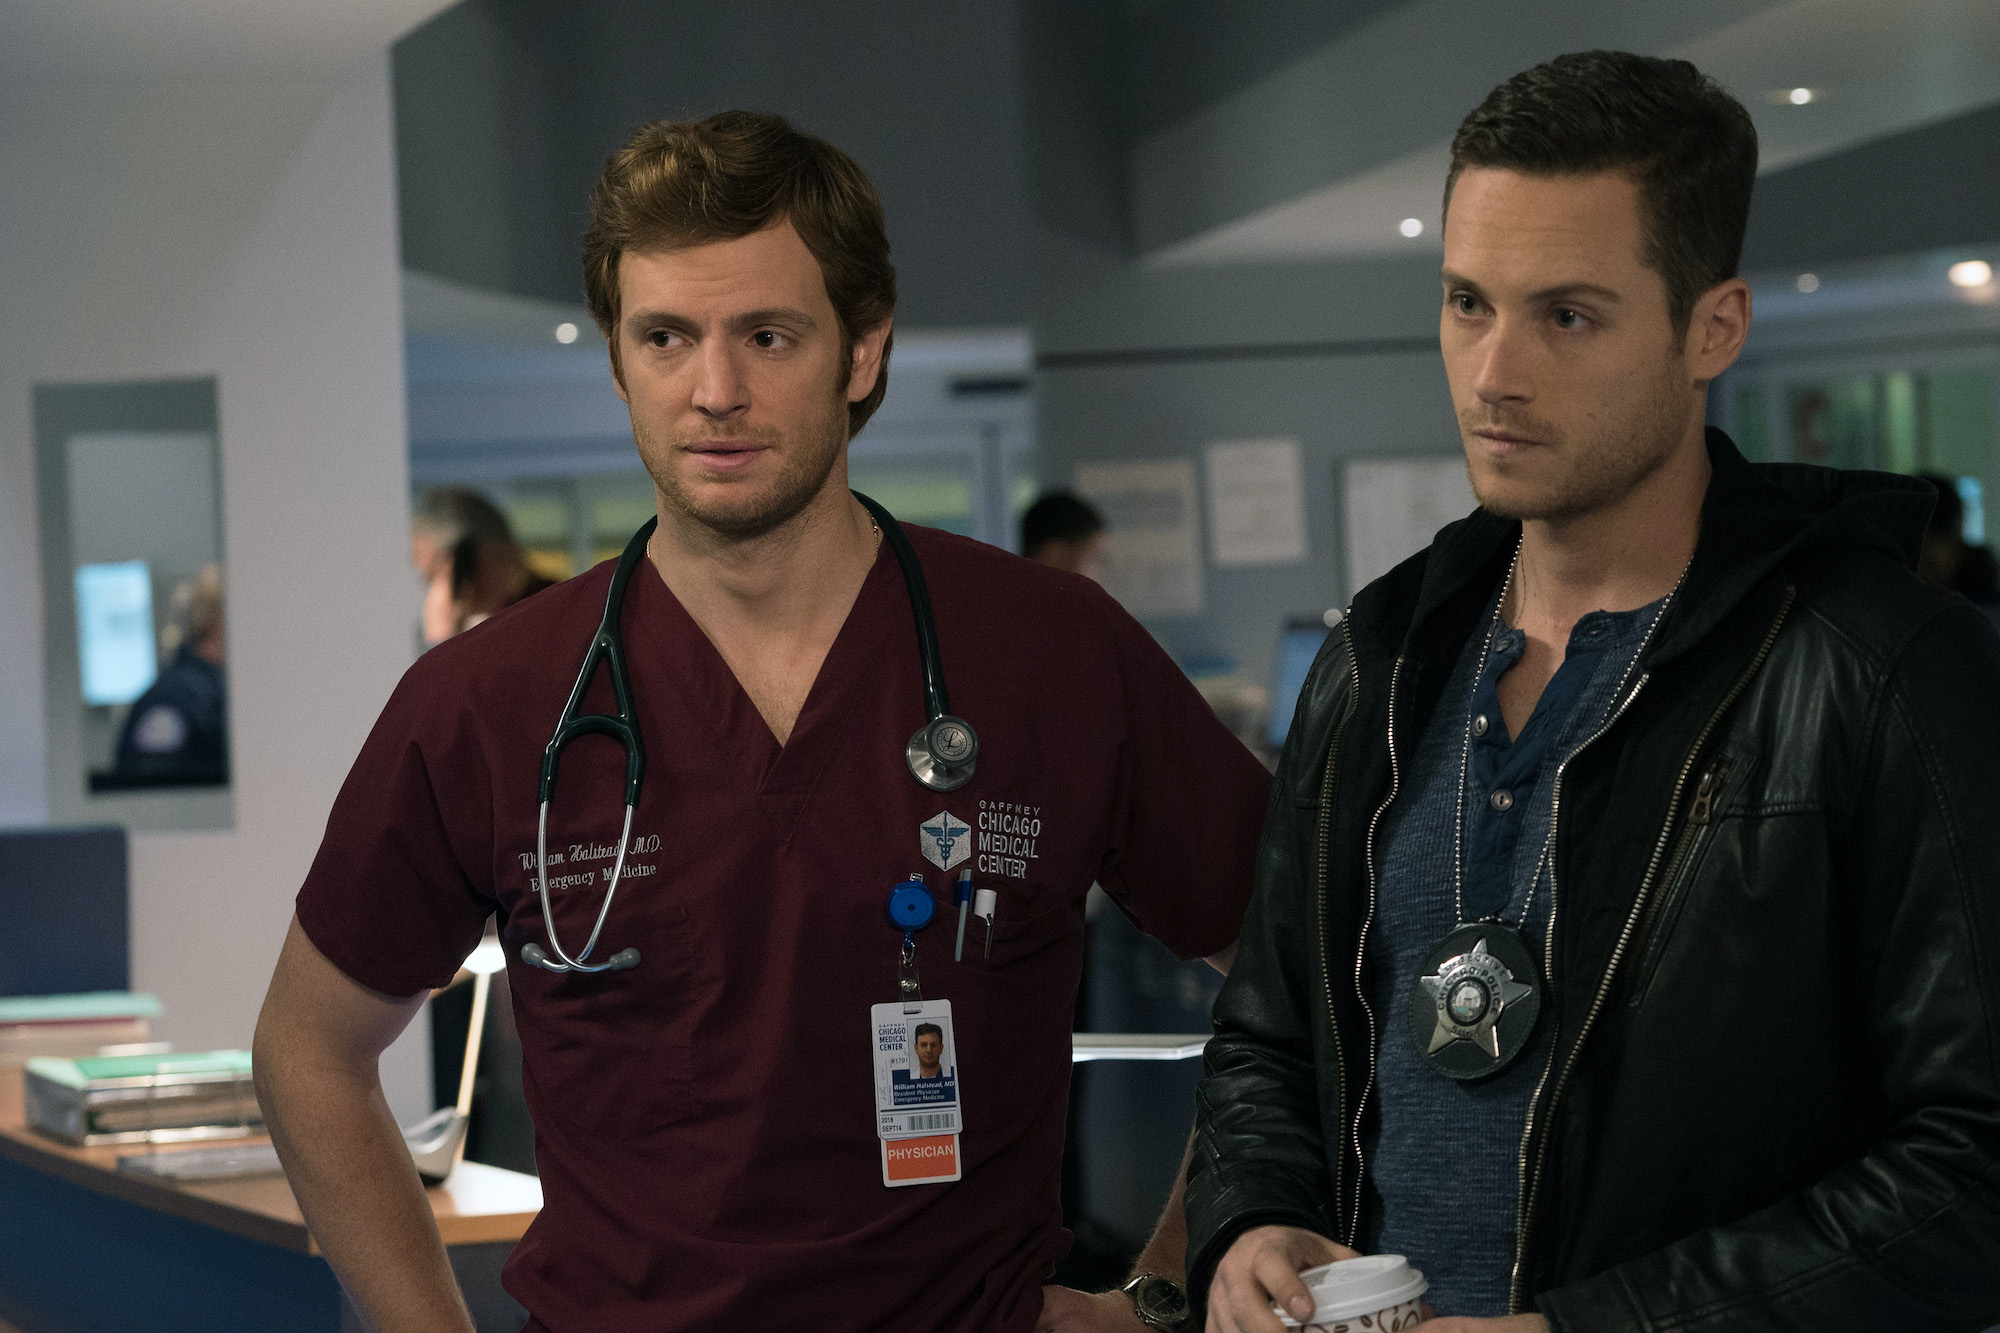 Will Halstead and Jay Halstead on 'Chicago Med' in a hospital setting